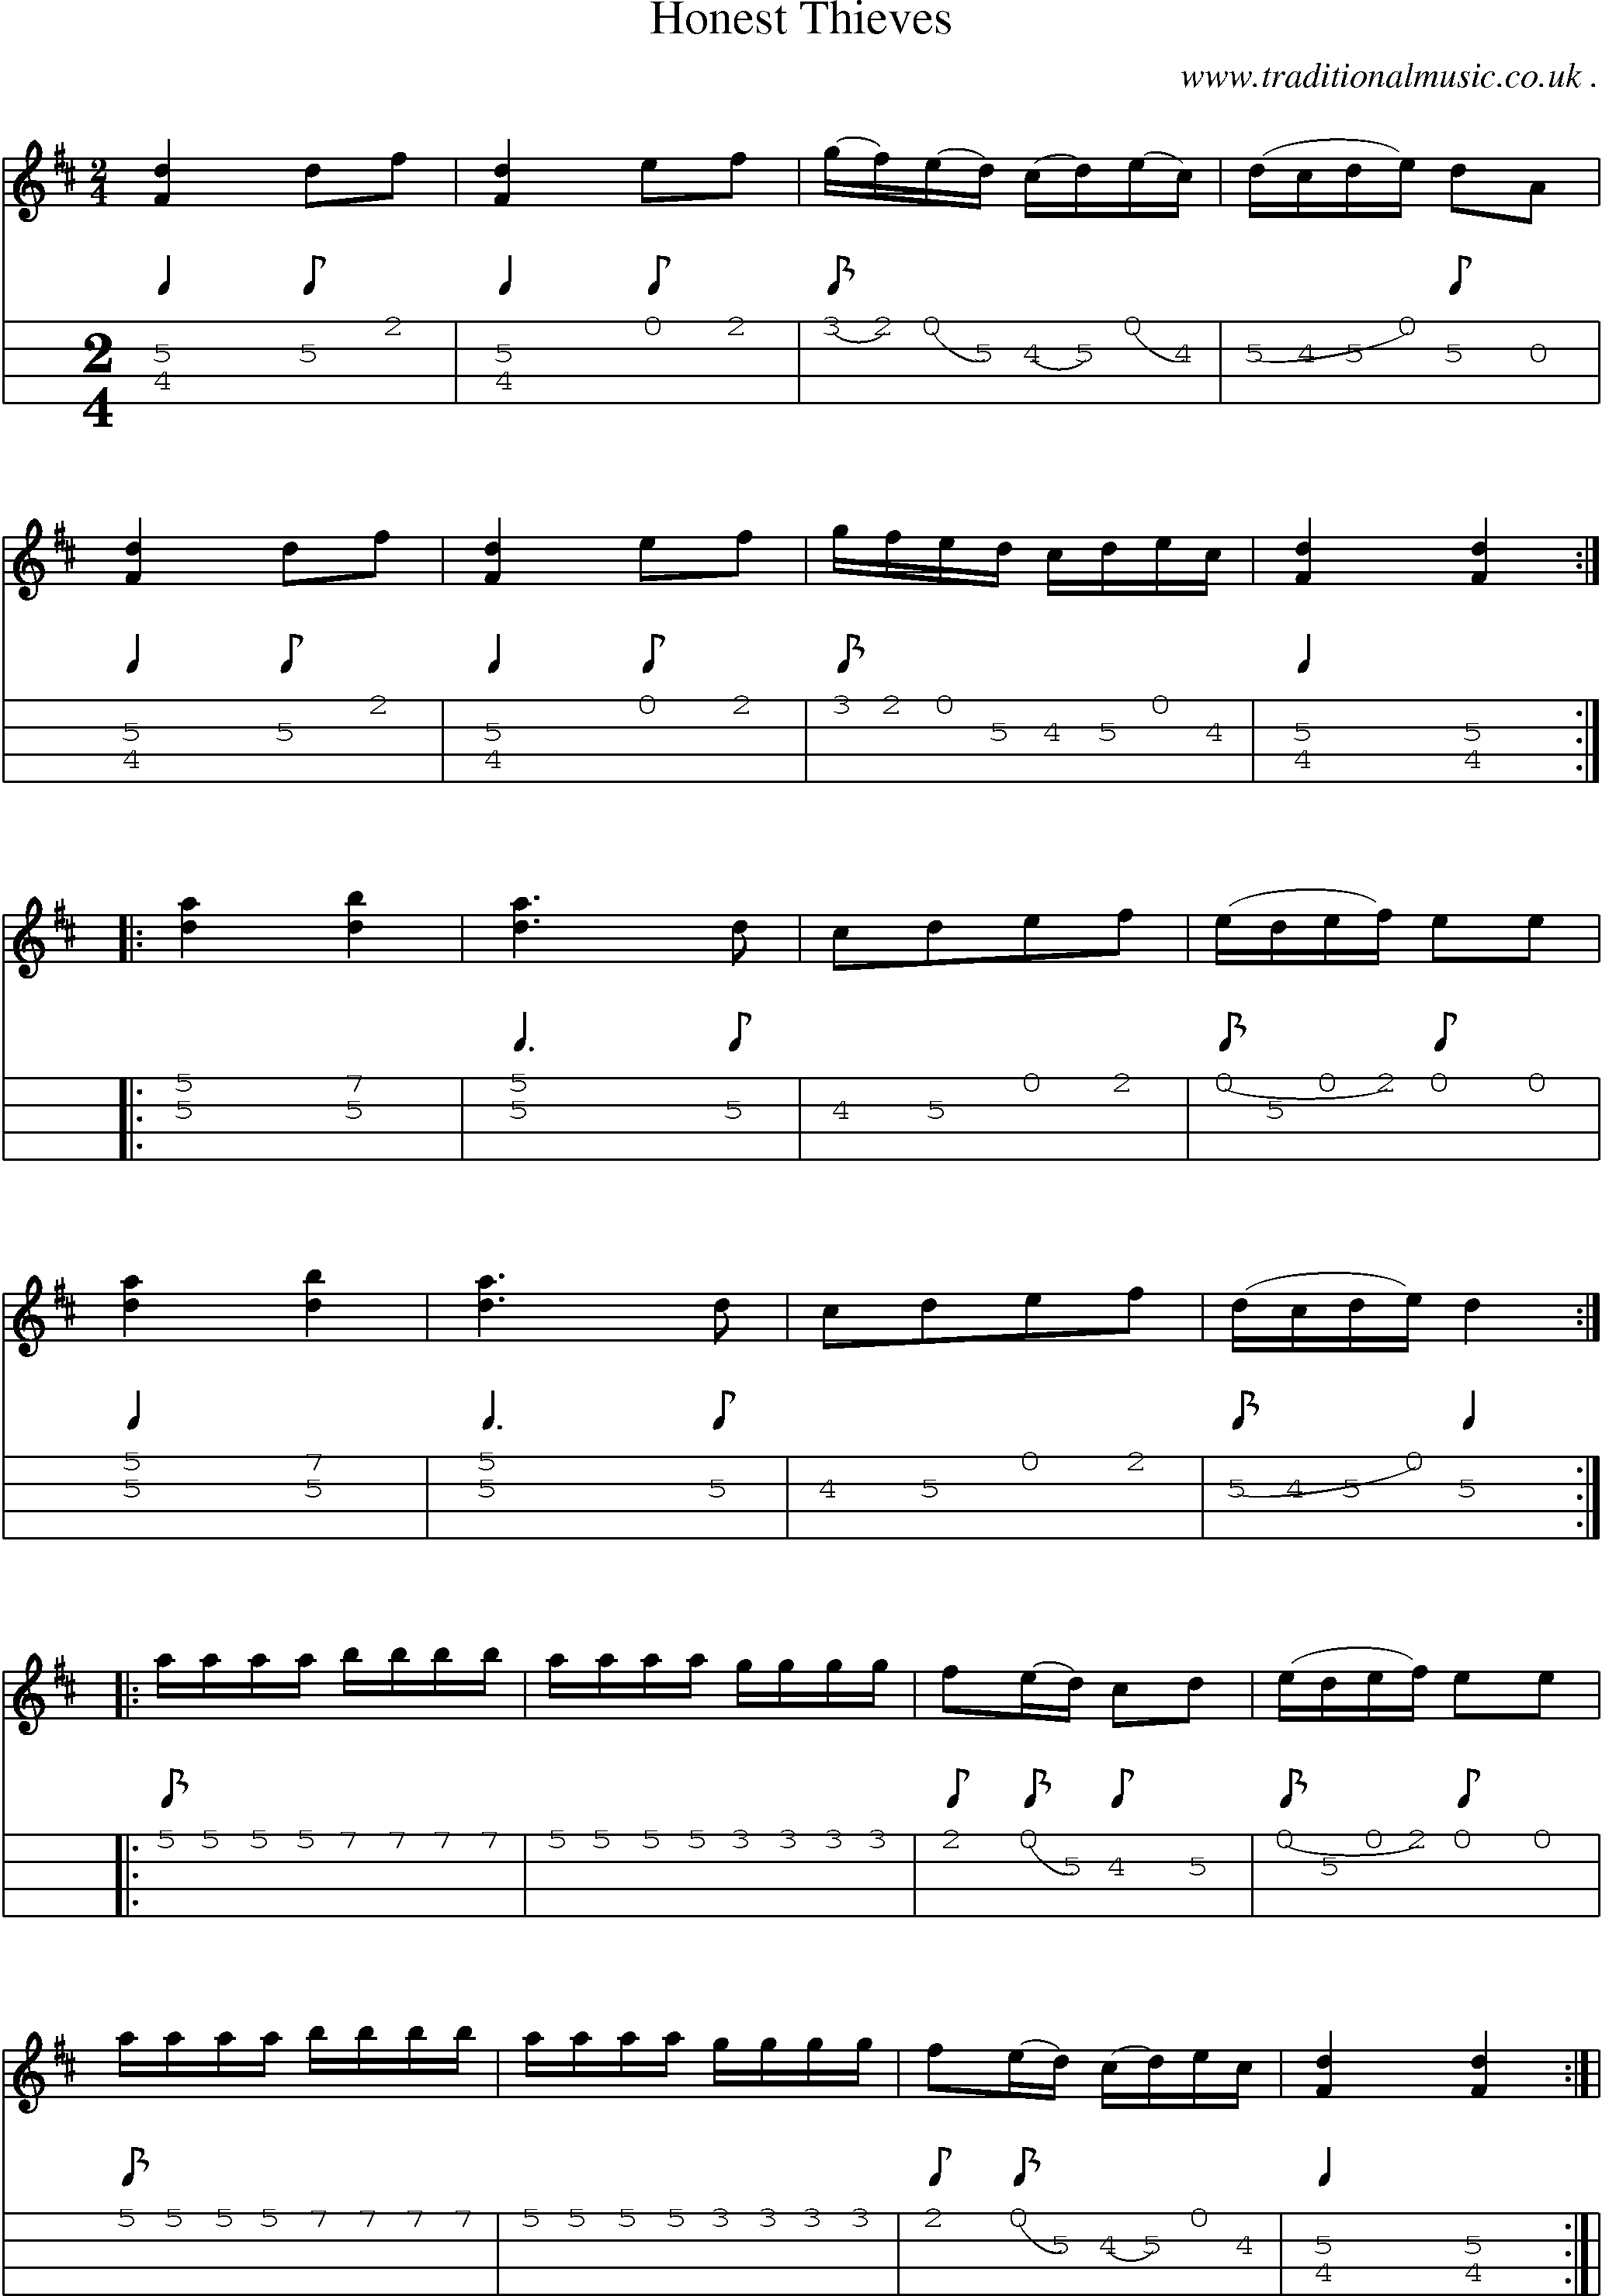 Sheet-Music and Mandolin Tabs for Honest Thieves